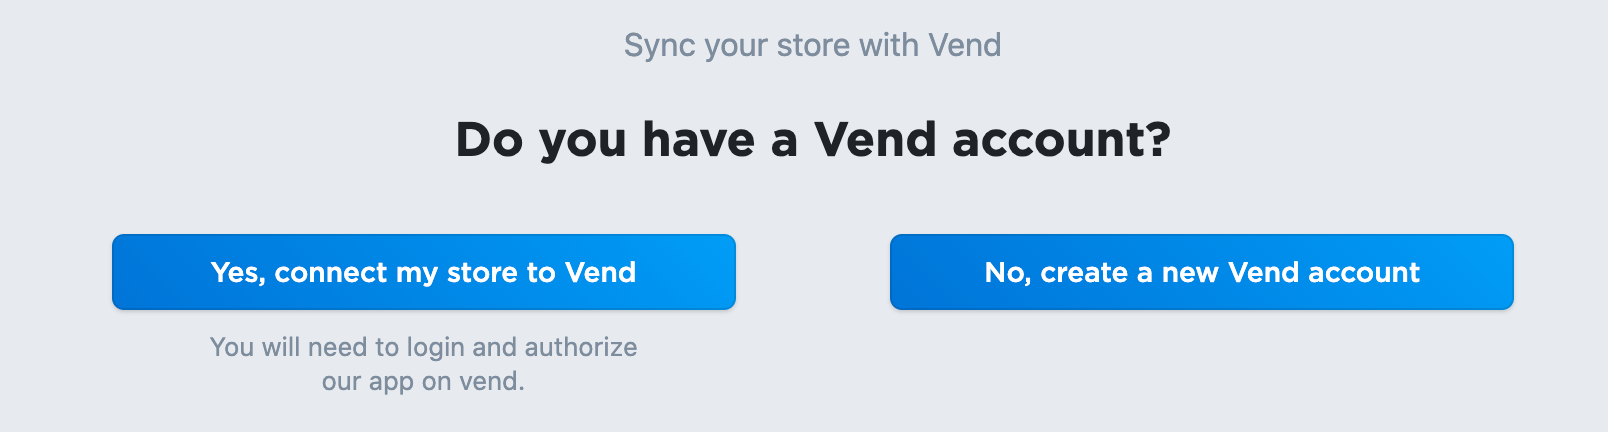 Ecwid_for_Vend_POS__7_.png